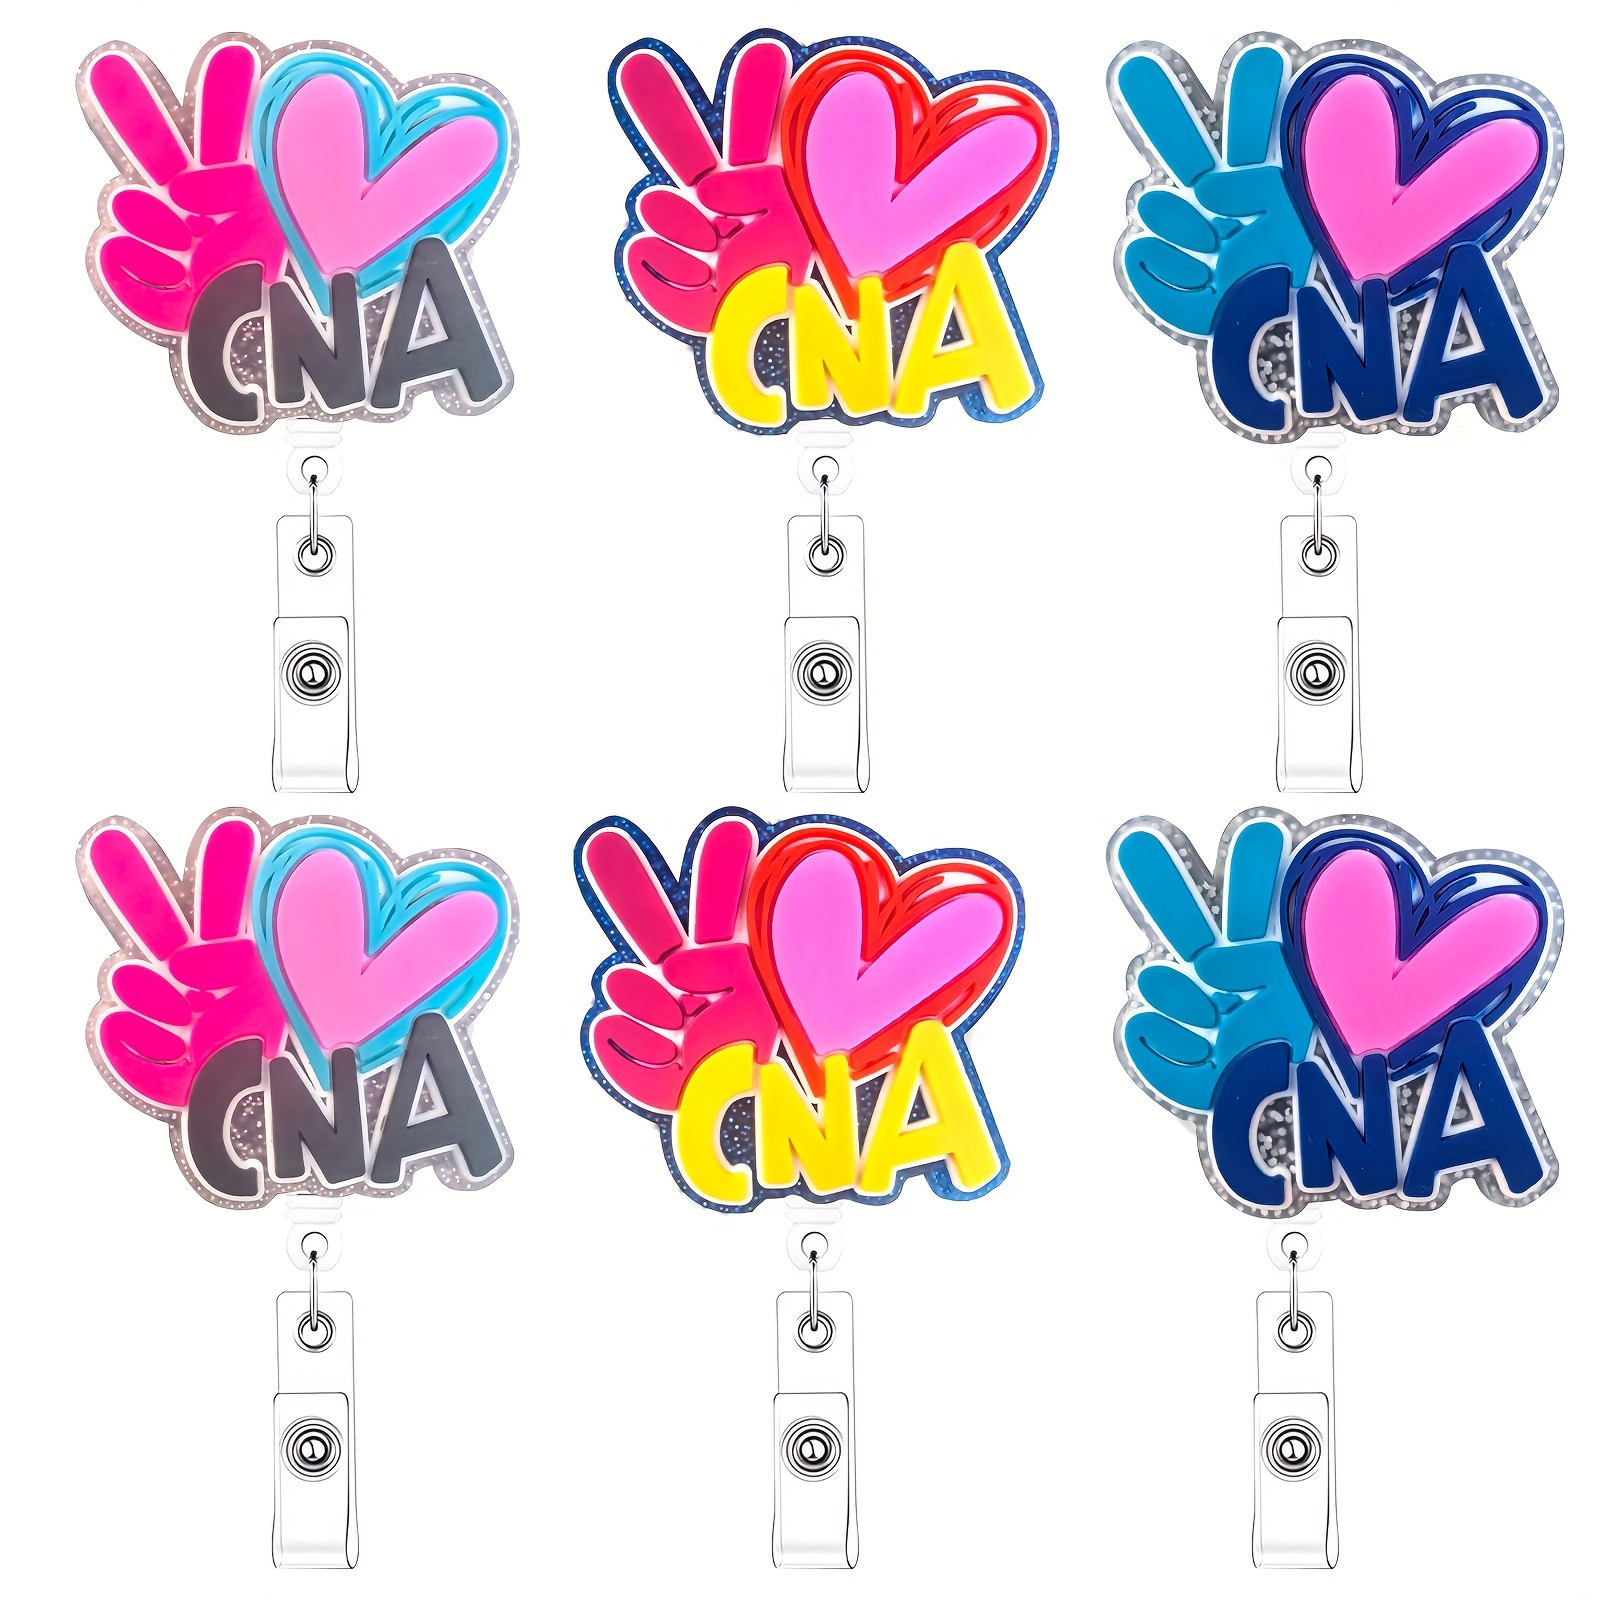 

6pcscna Series 2 Badge Reel Holders & Nurse Care Name Tag Cards Id Clip Retractable Cute White Certified Nurse Aid Clip Hospital Work Accessories Gift